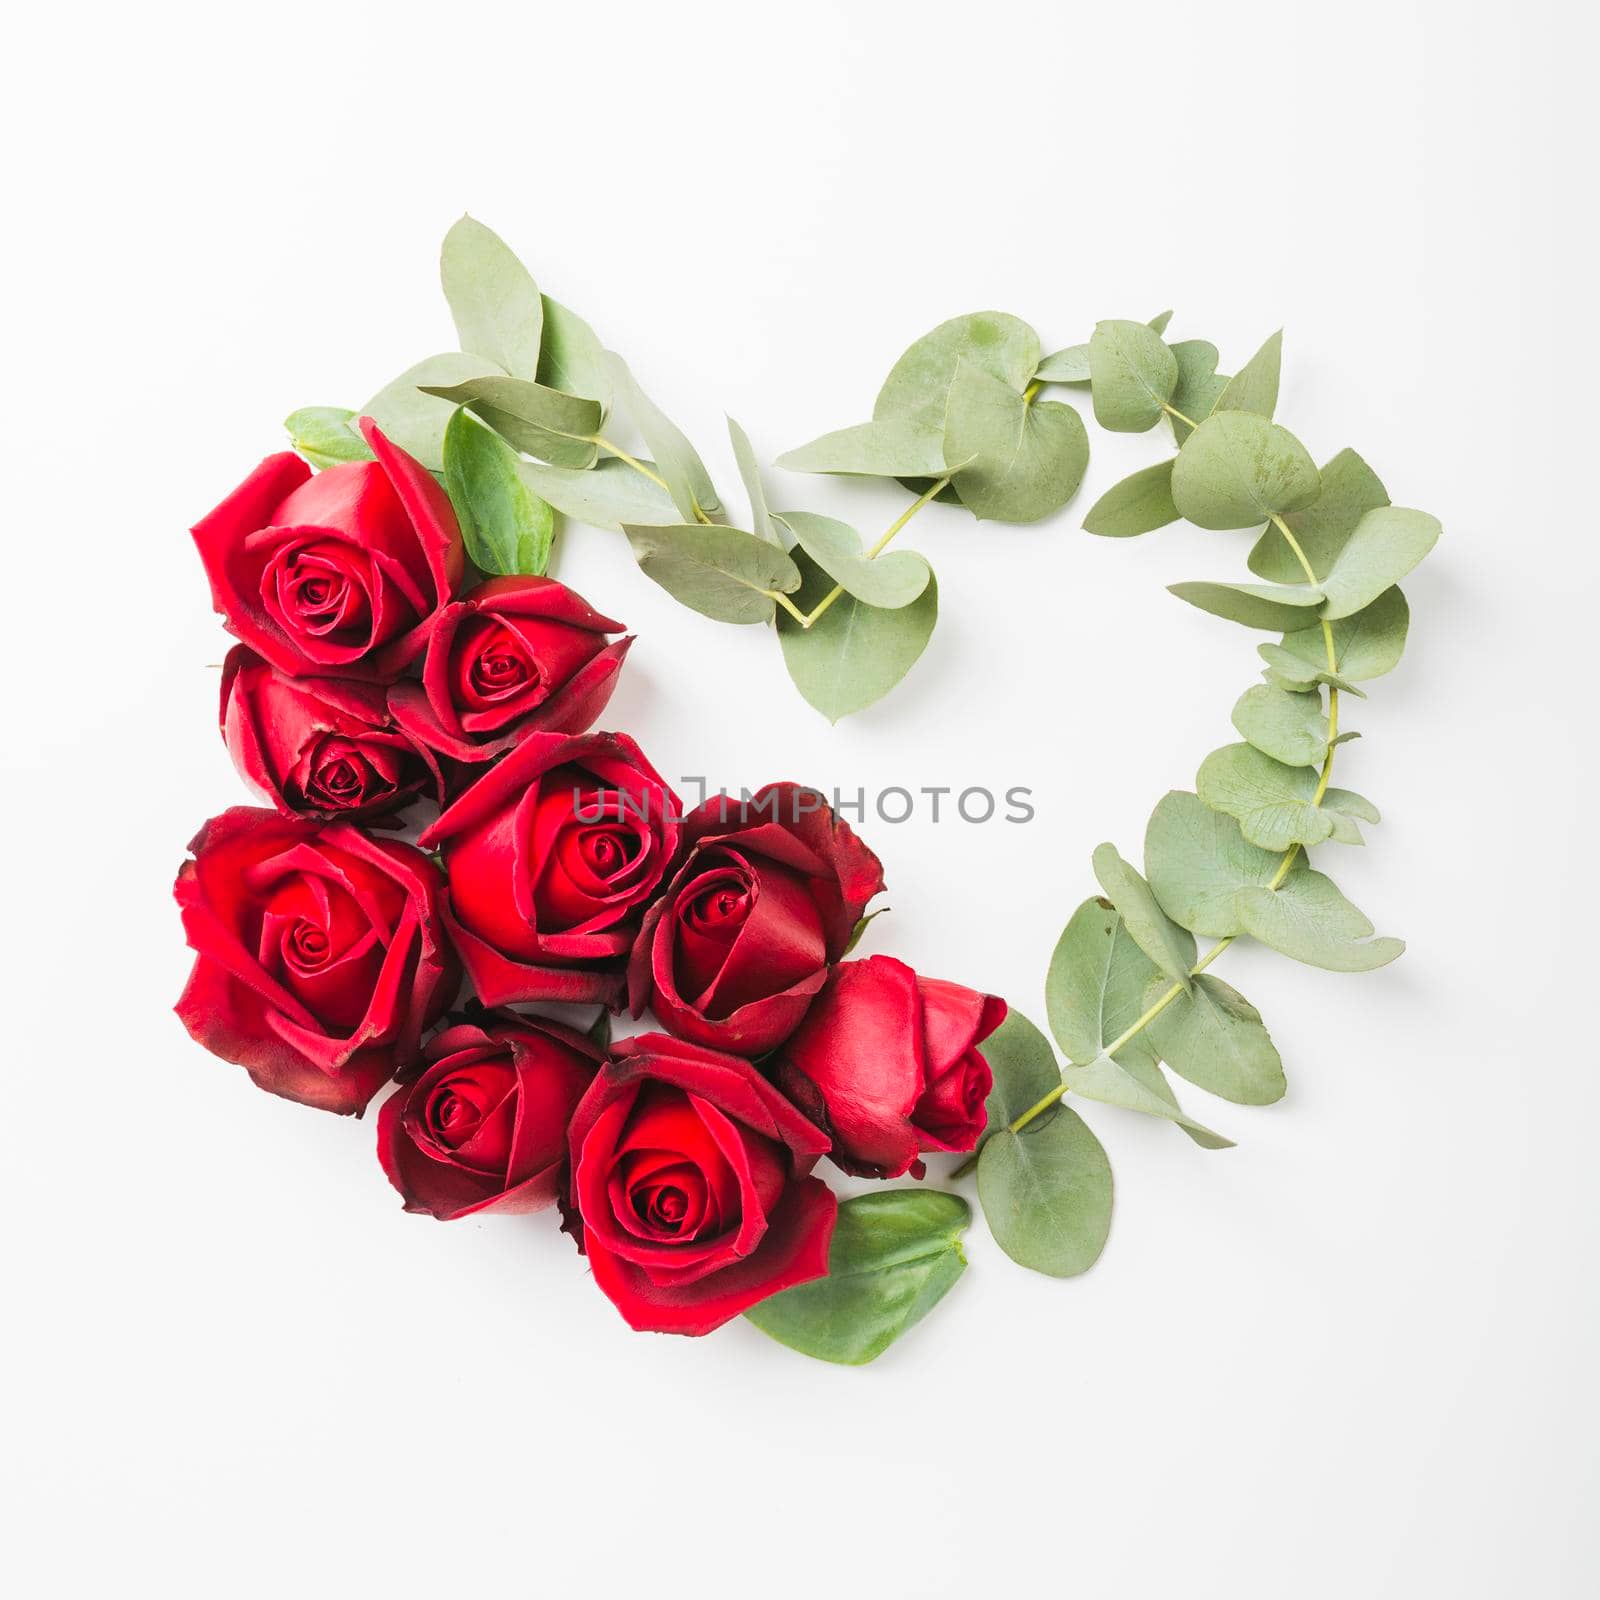 heart shape made with roses flower twig white background. High resolution photo